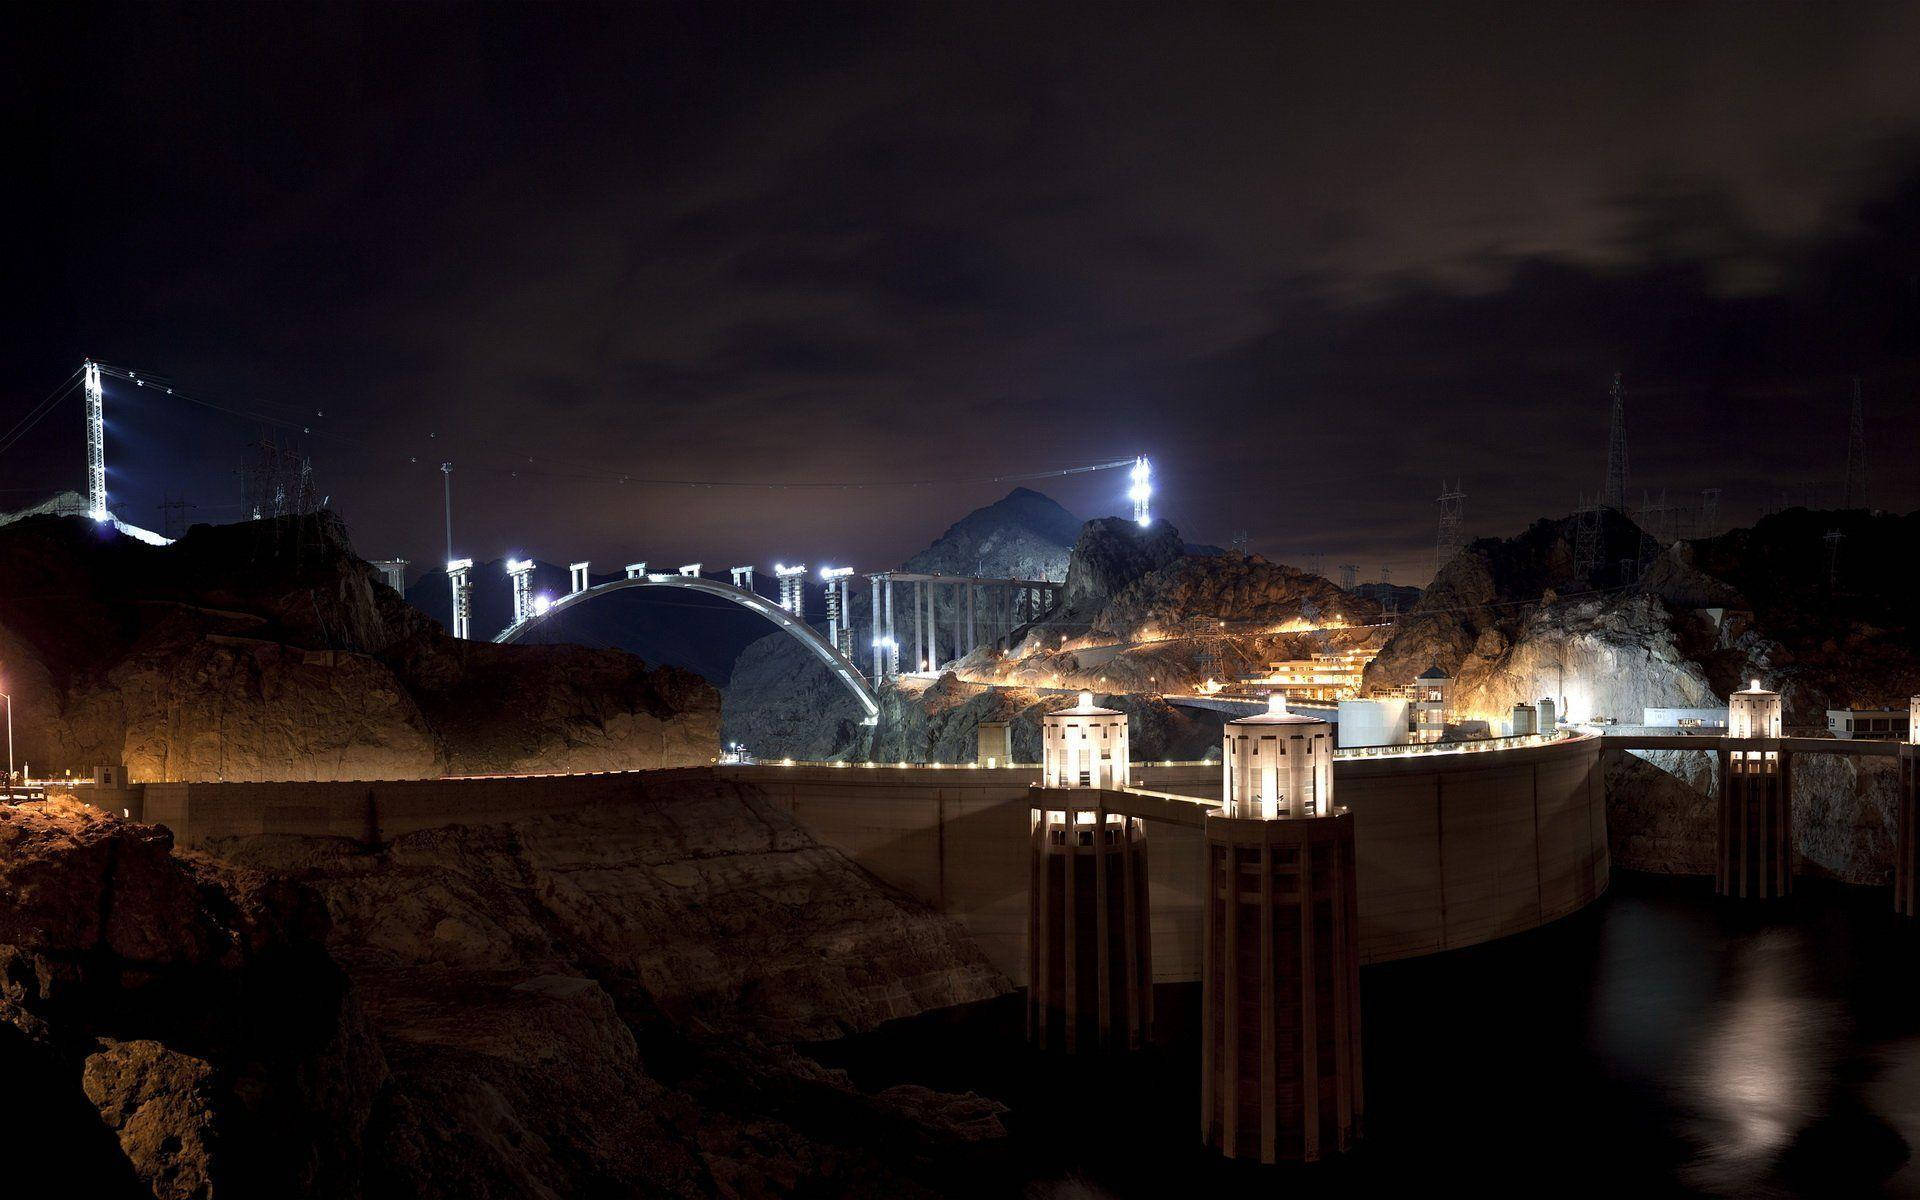 A spellbinding view of the Hoover Dam illuminated at night. Wallpaper